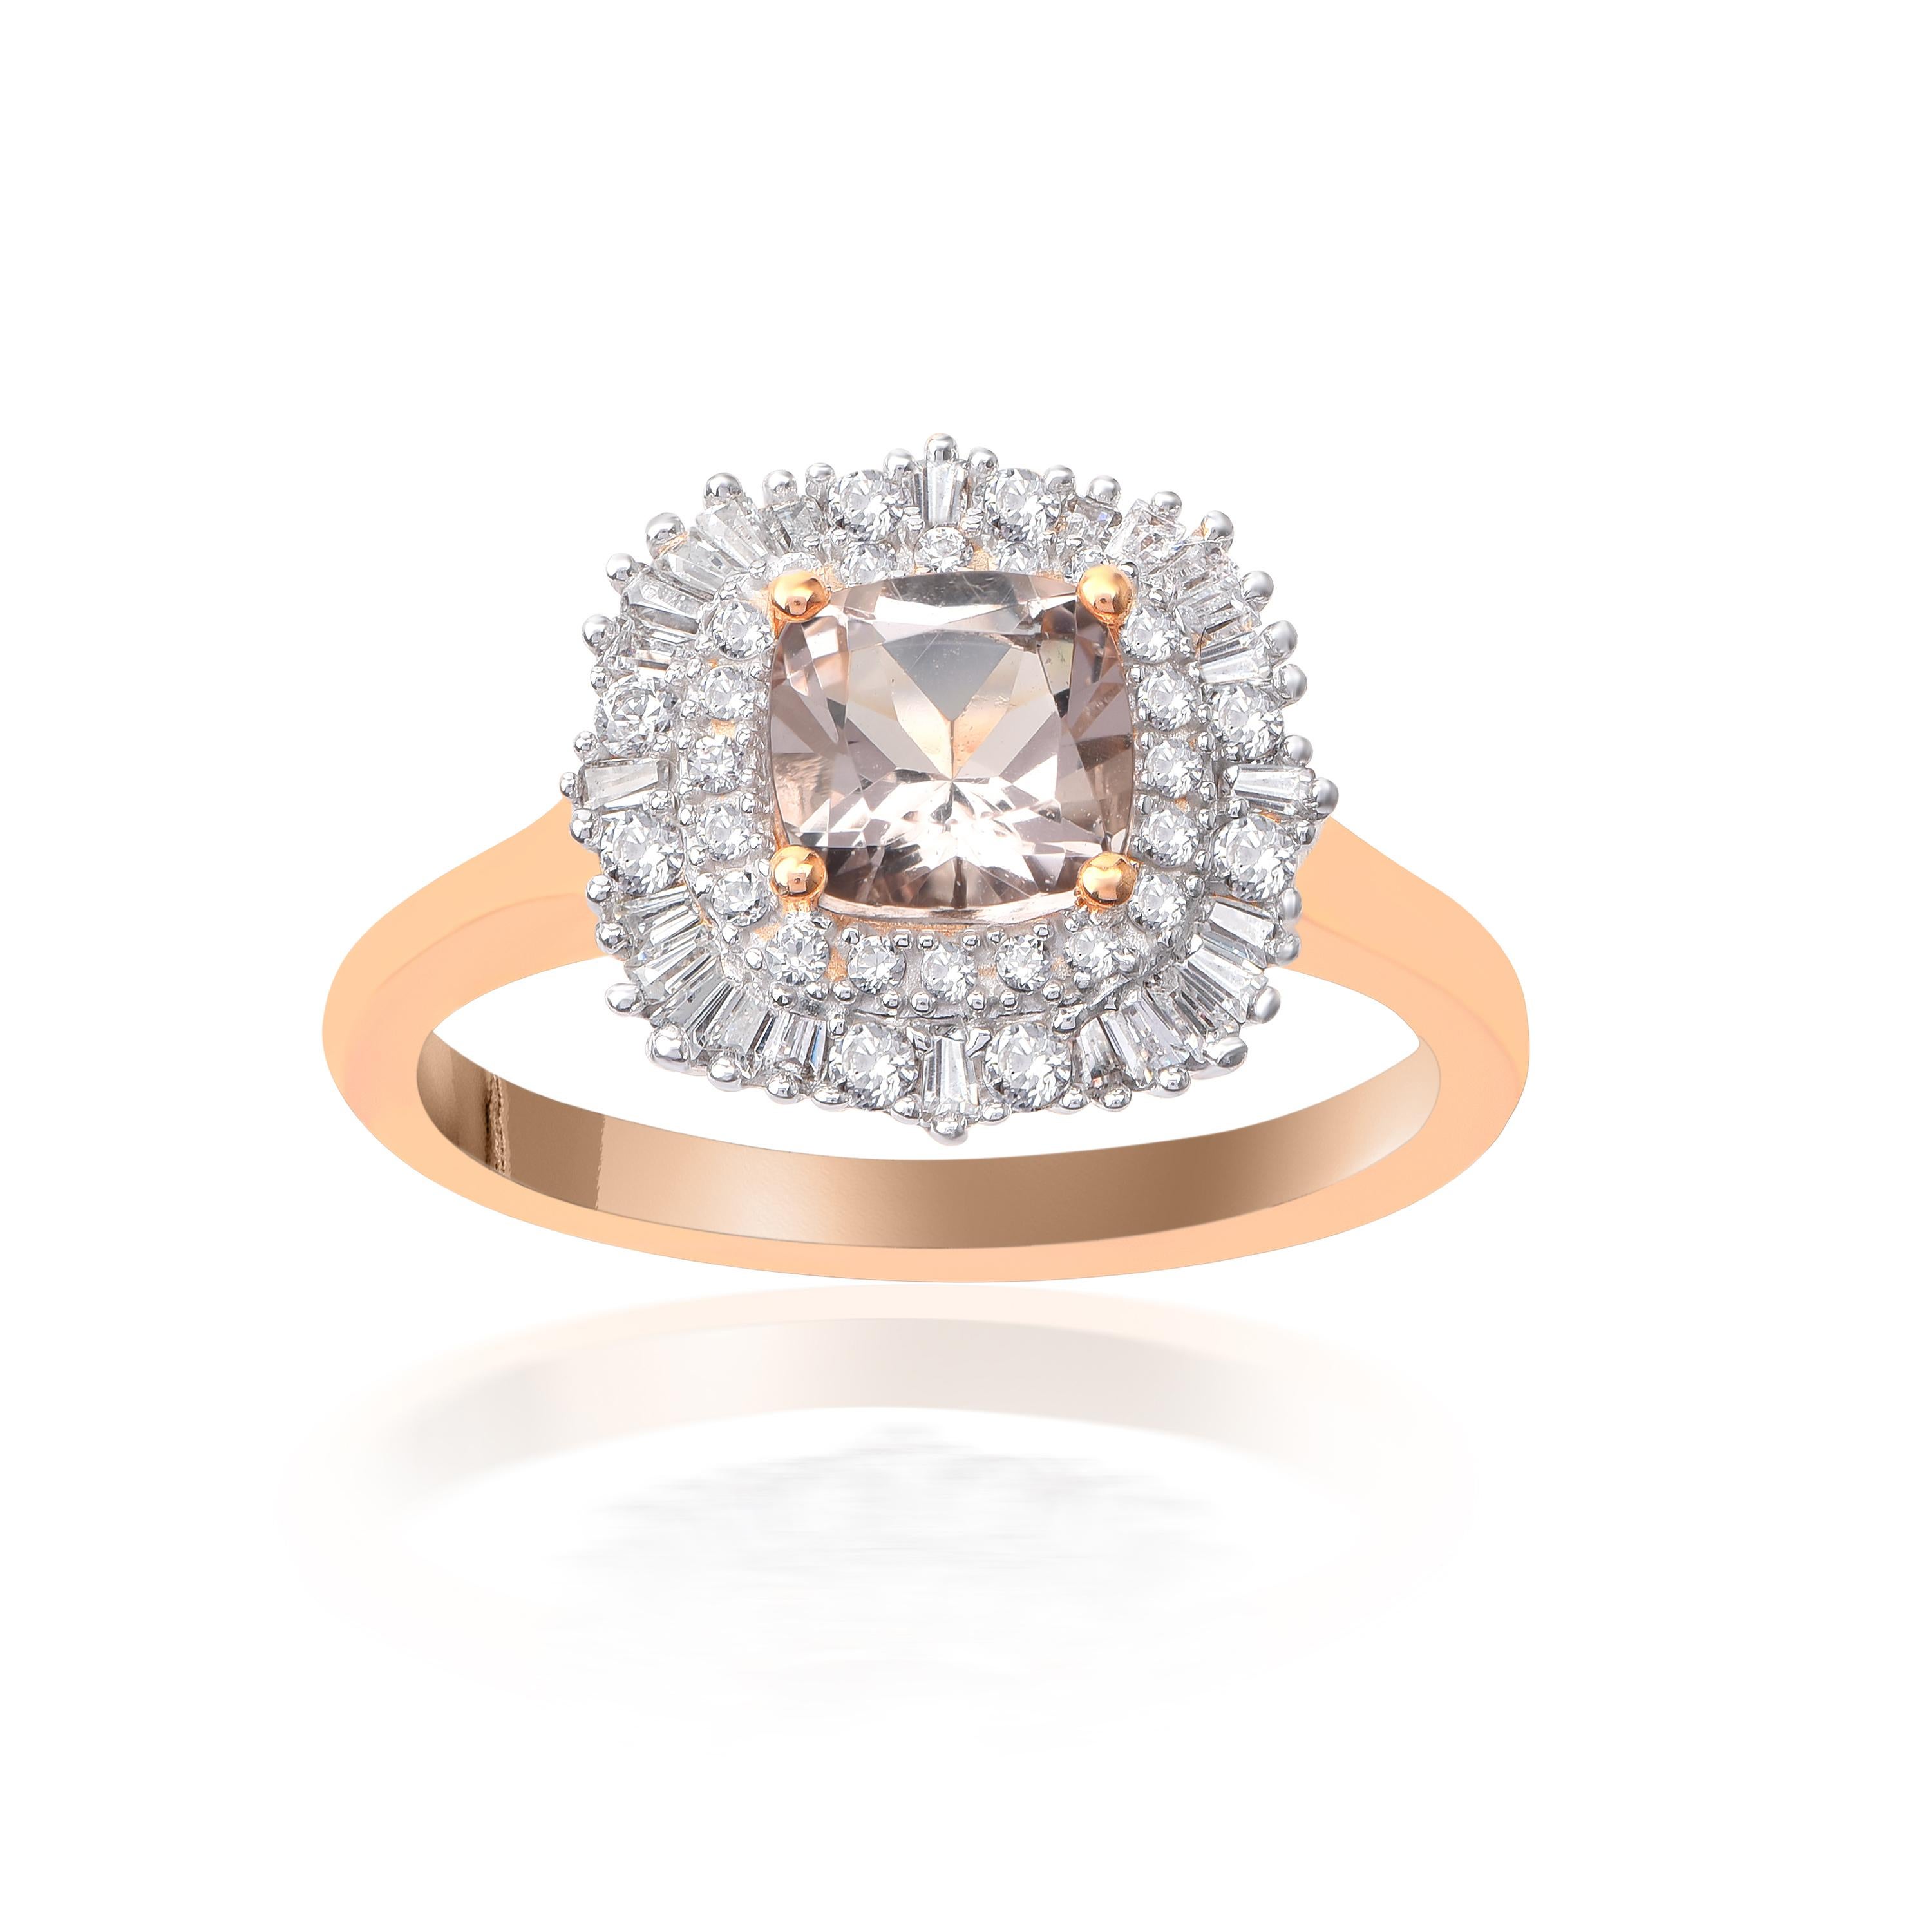 Exquisitely designed in 18-karat rose gold, this shimmering design features 28 brilliant cut, 24 baguette diamonds and 1 natural morganite gemstone in micro-prong and prong setting. The diamonds are graded H-I Color, I2 Clarity.